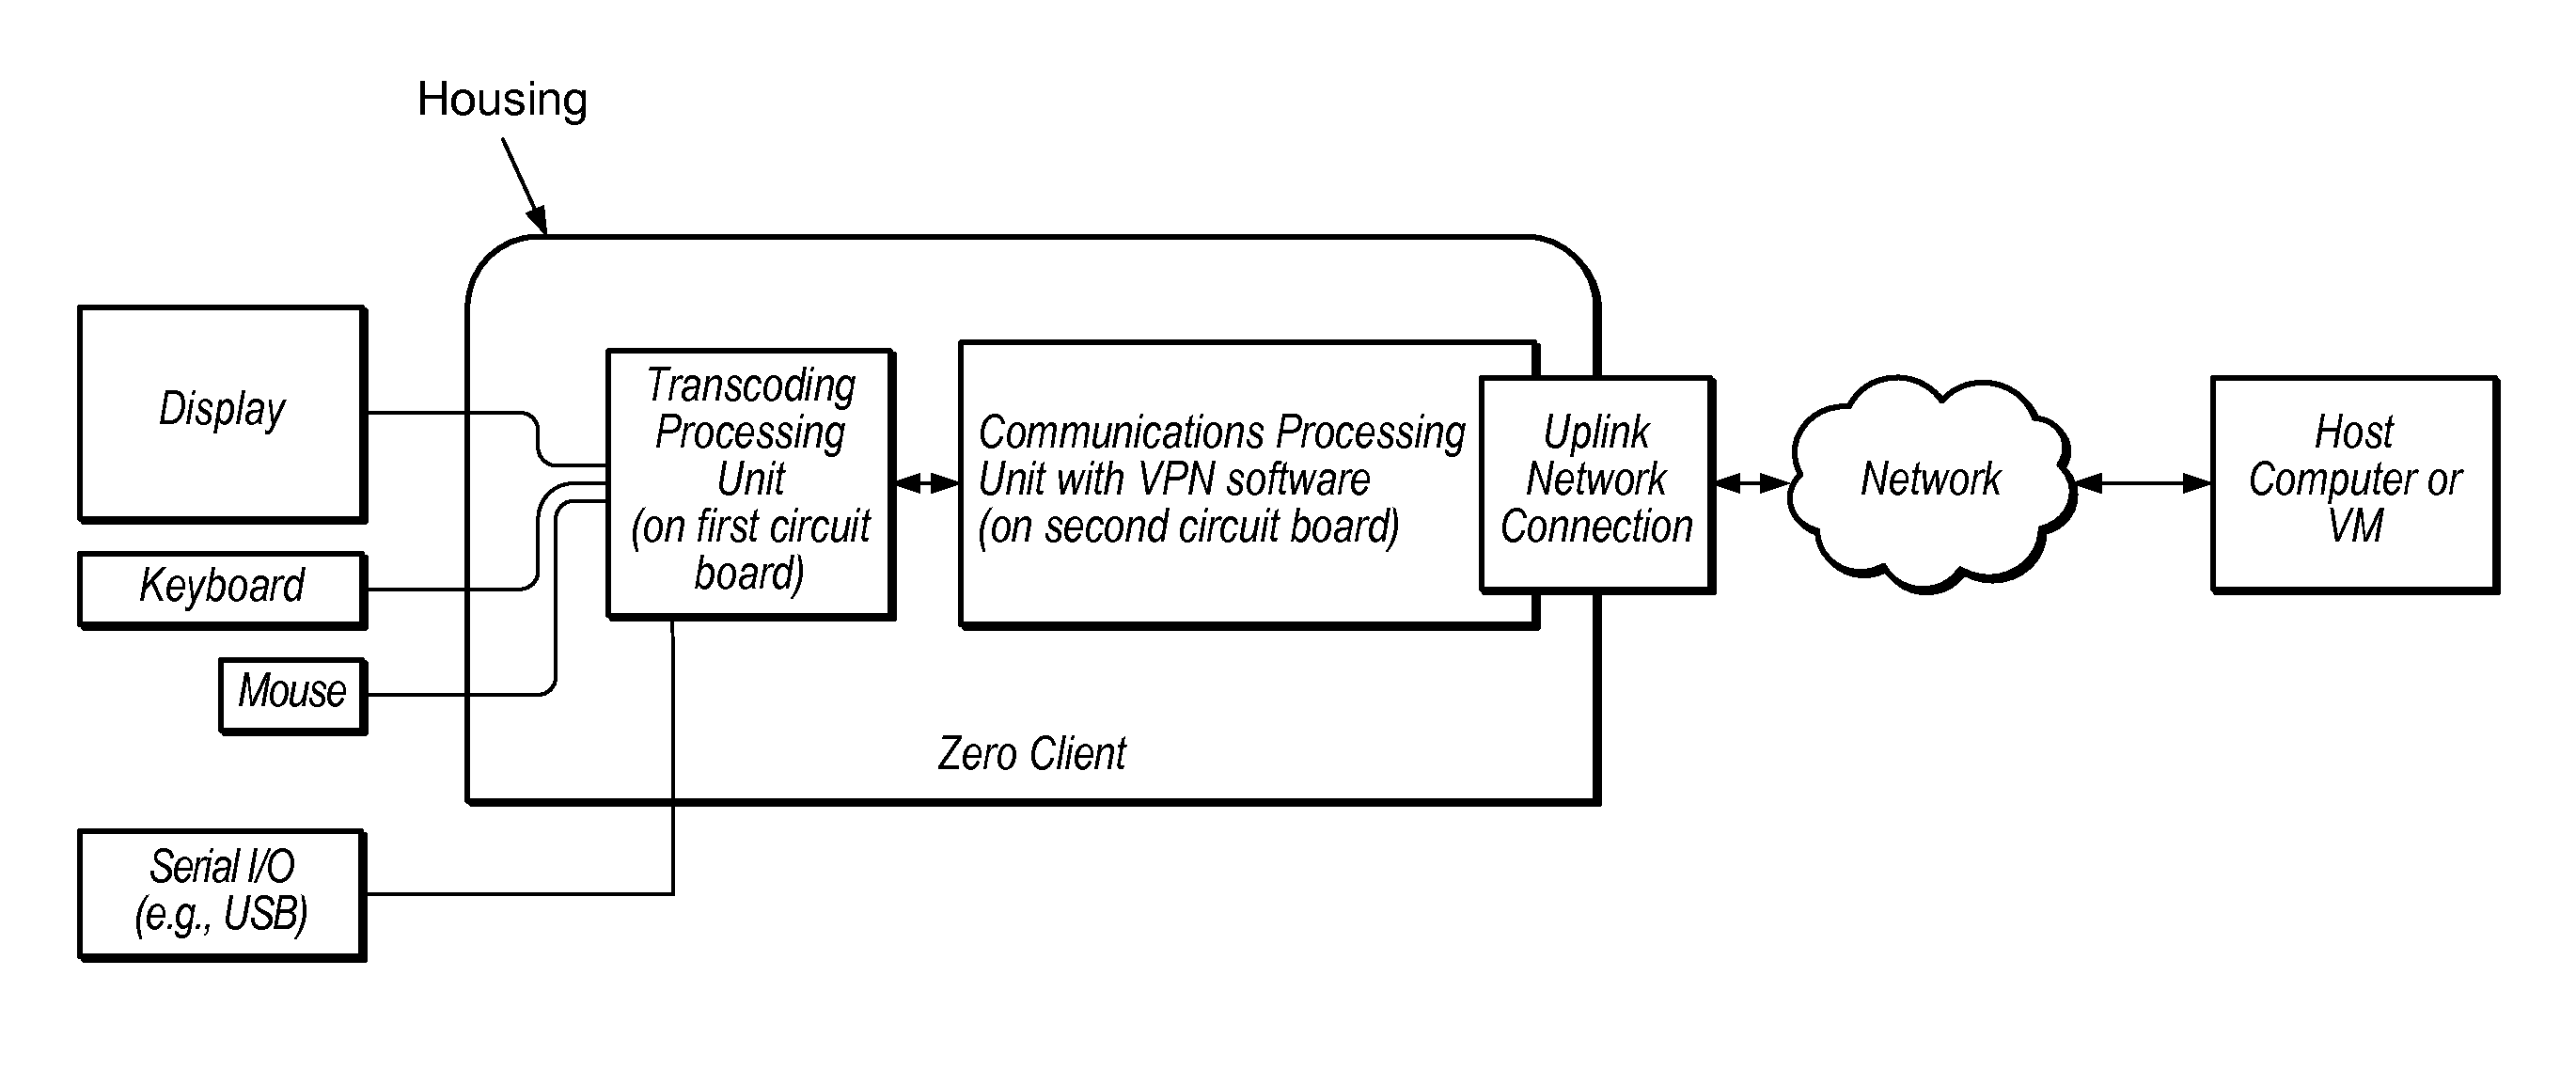 Zero Client Device With Integrated Virtual Private Network Capability